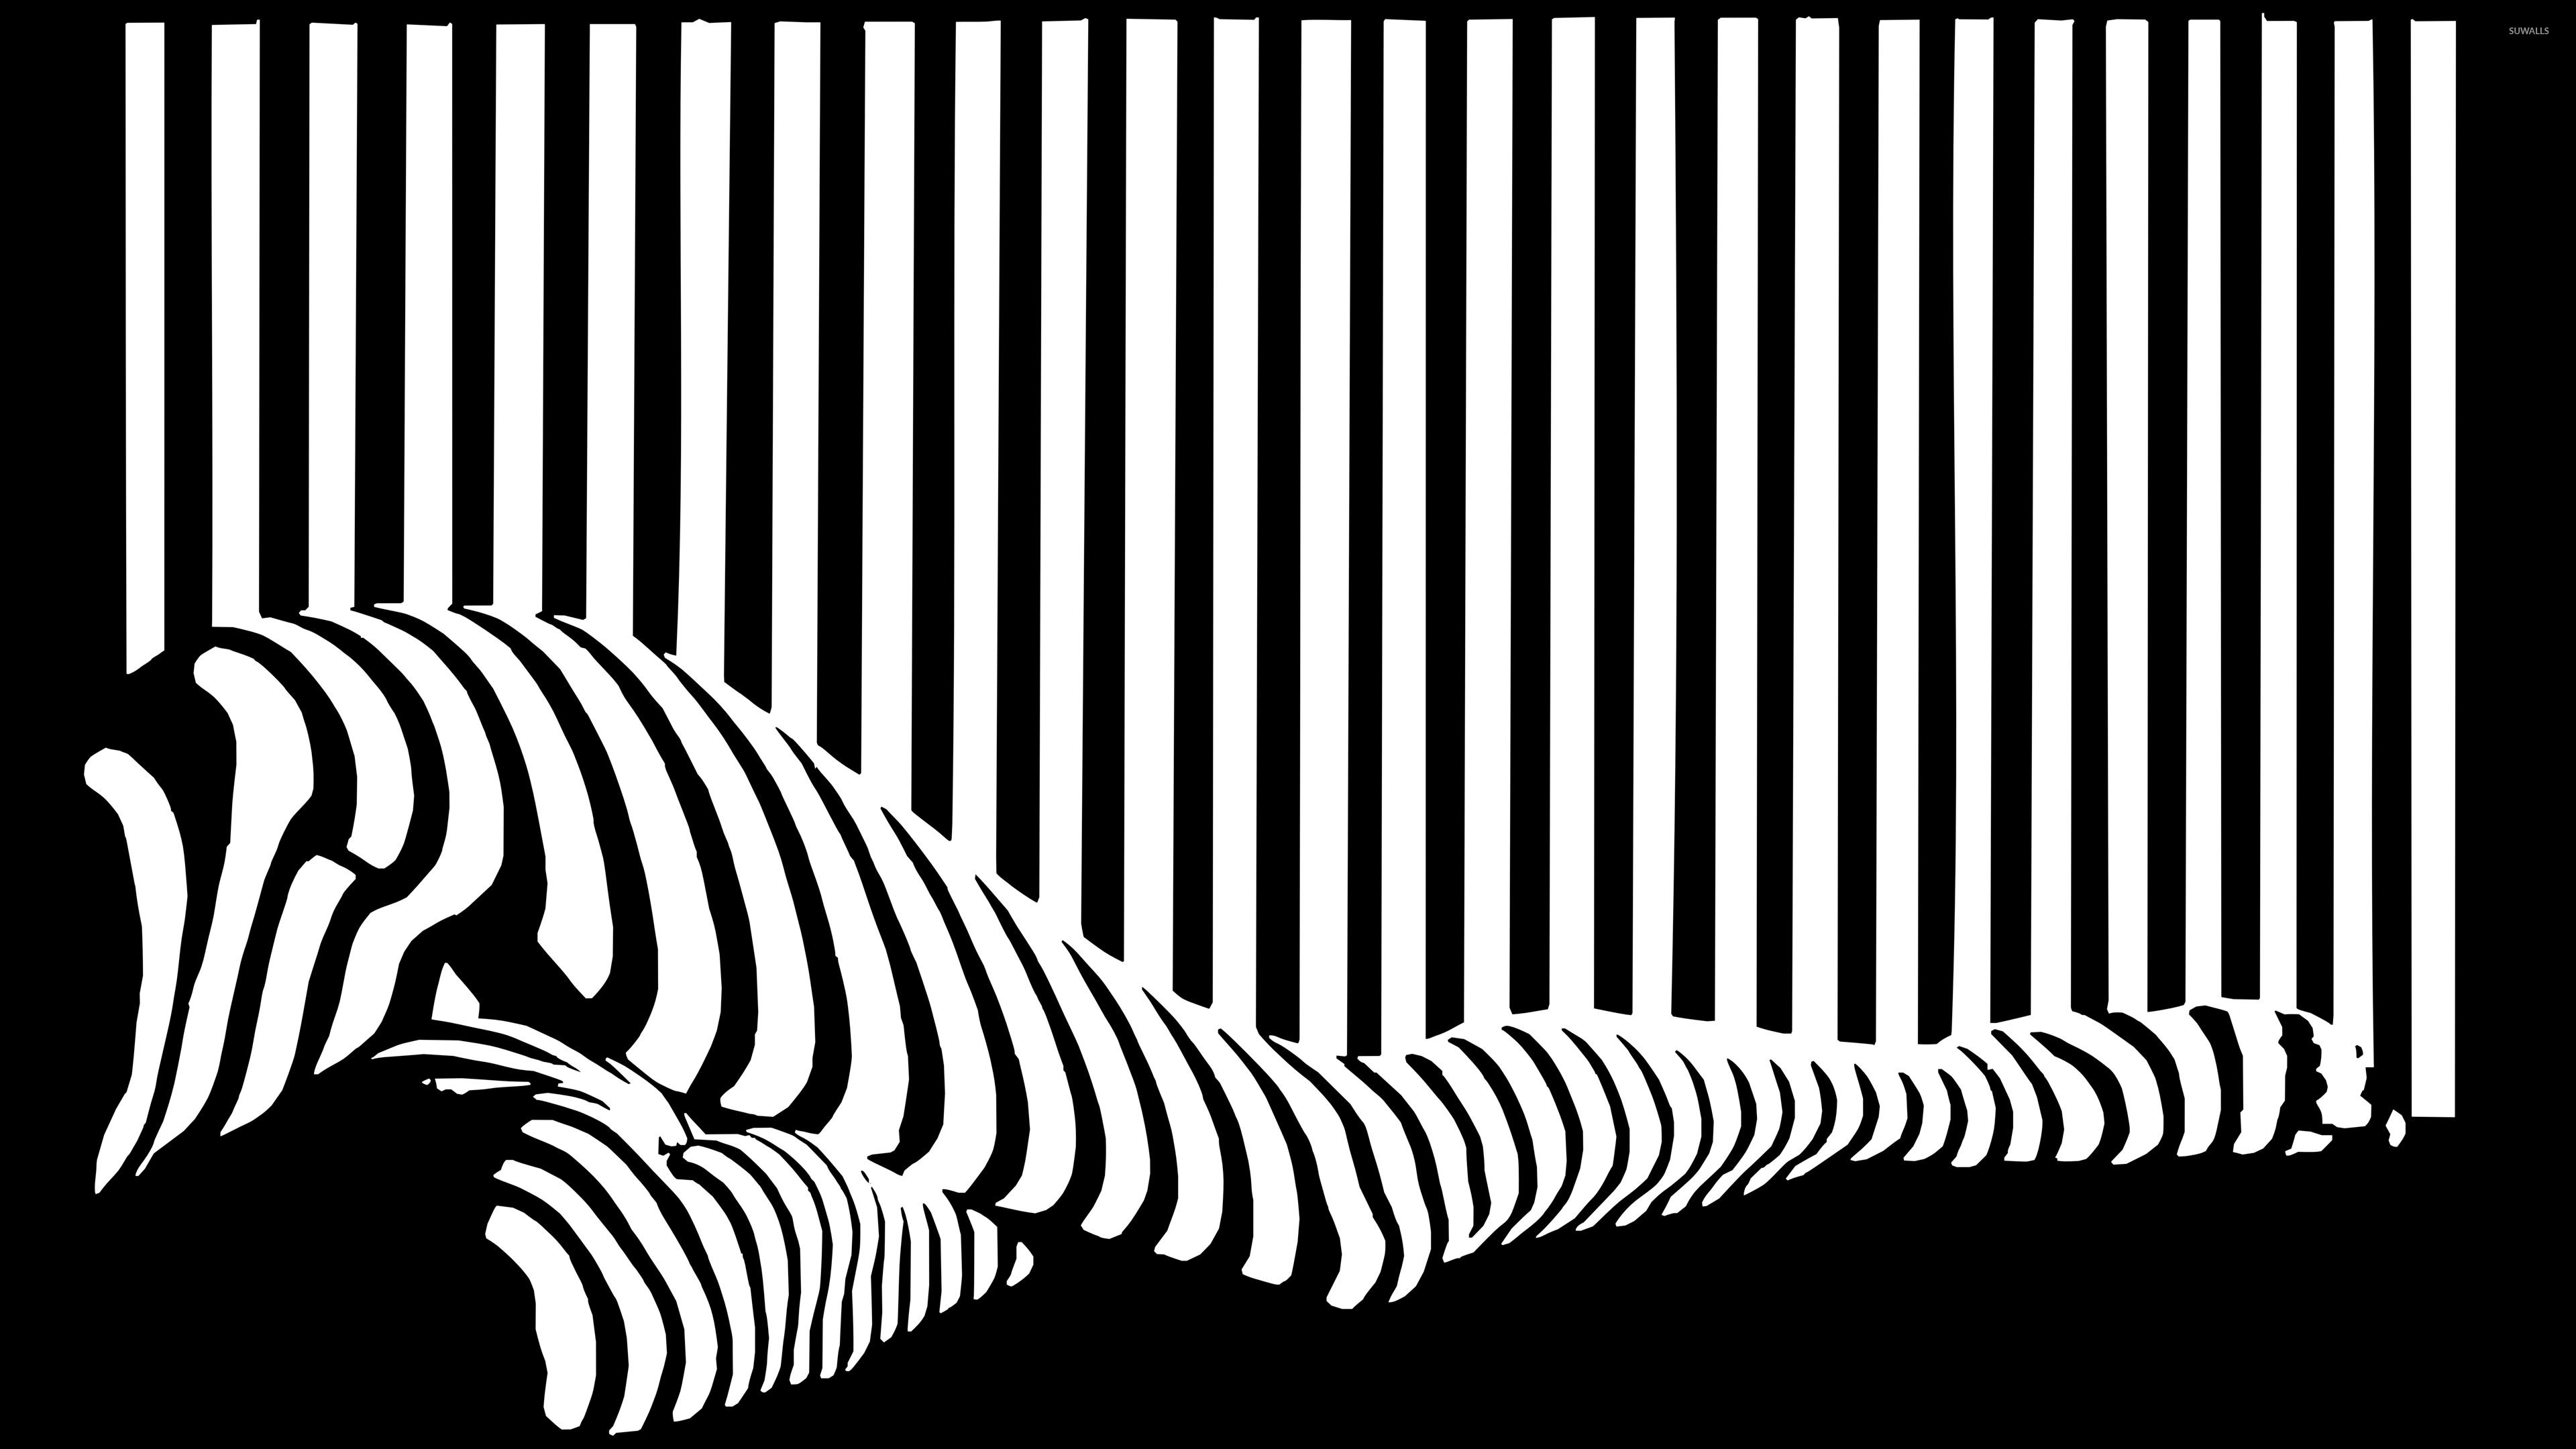 Best Of Black And White Striped Wallpaper Horizontal - Black And White Strip Wallpapers Hd - HD Wallpaper 